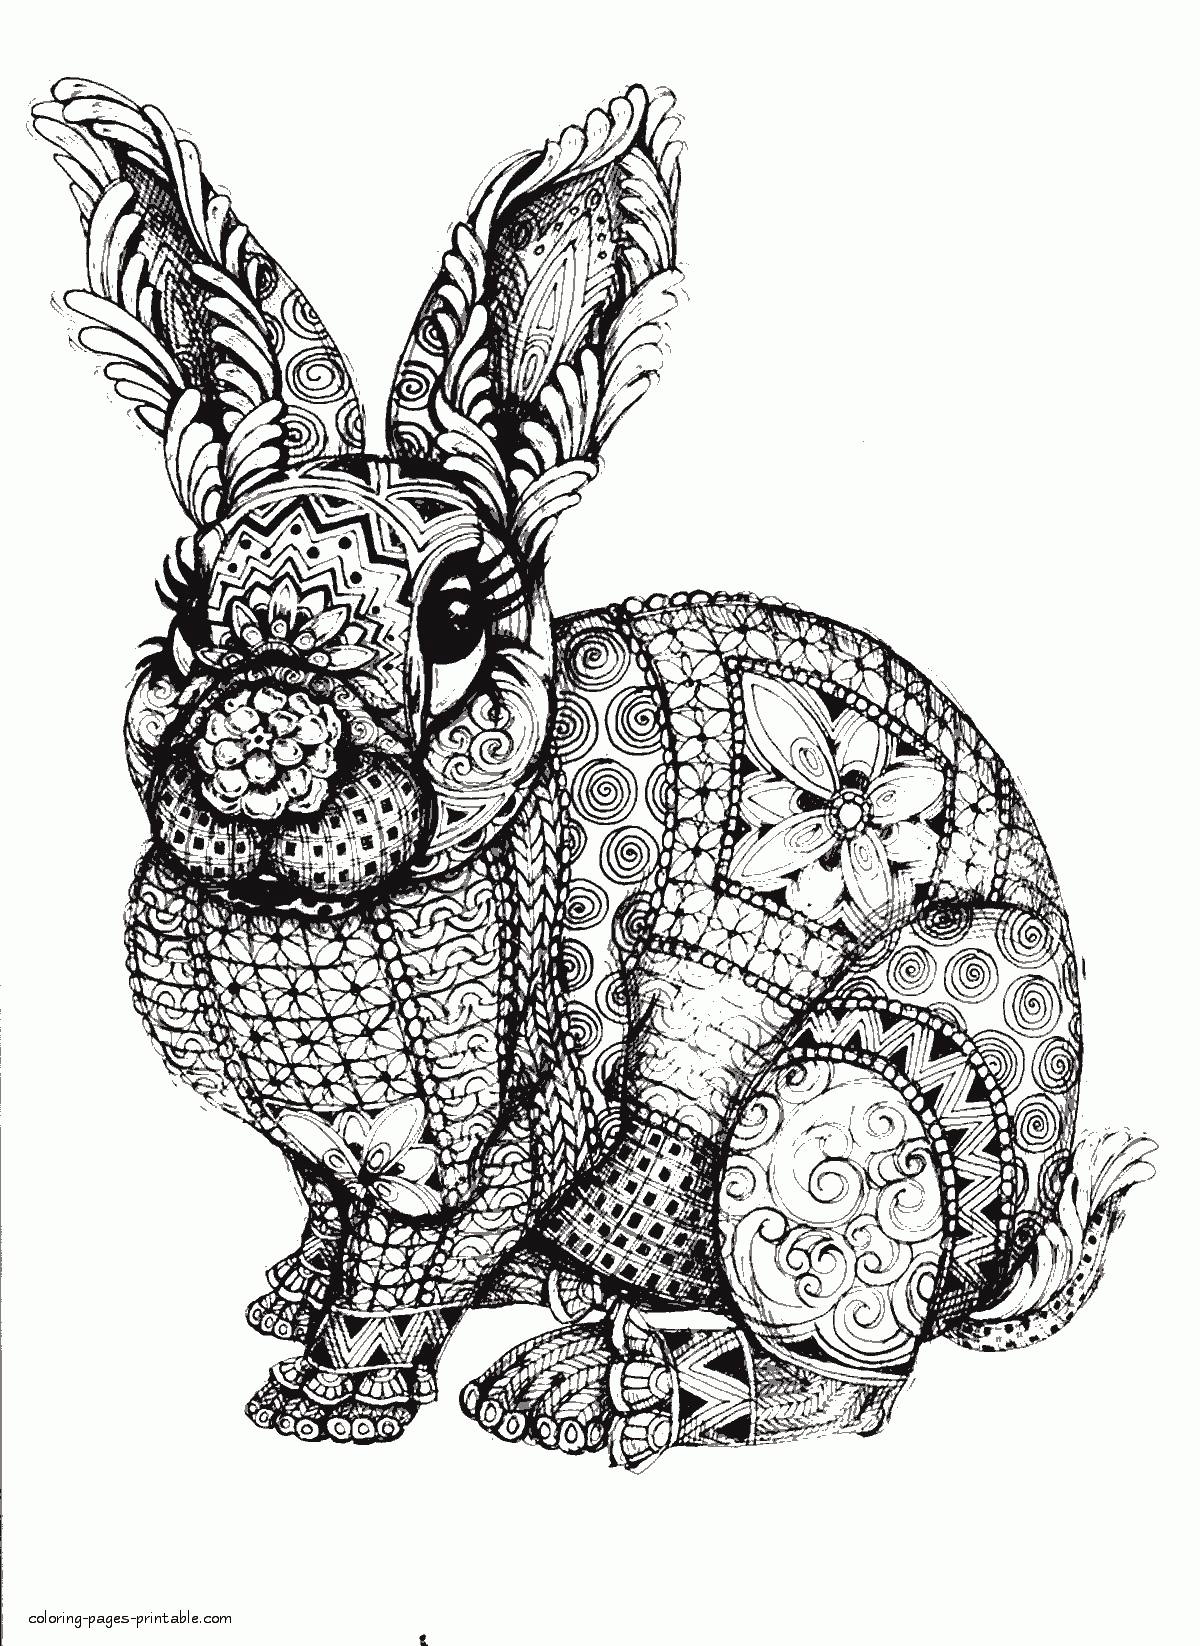 Difficult animal coloring pages a rabbit animal coloring pages mandala coloring pages mandala coloring